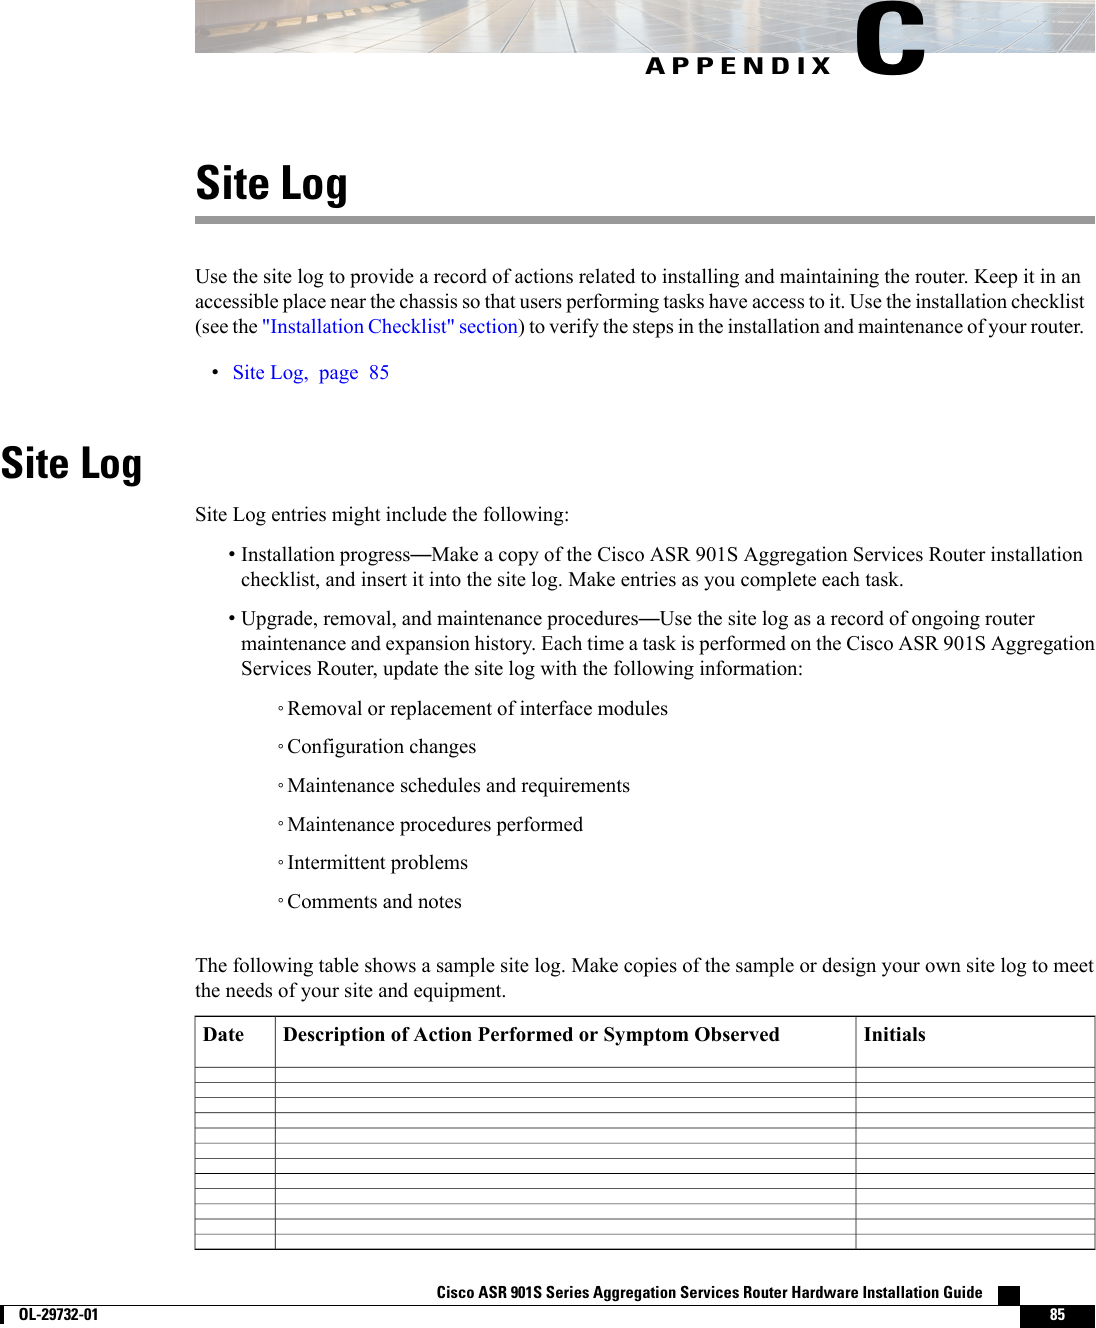 APPENDIX CSite LogUse the site log to provide a record of actions related to installing and maintaining the router. Keep it in anaccessible place near the chassis so that users performing tasks have access to it. Use the installation checklist(see the &quot;Installation Checklist&quot; section) to verify the steps in the installation and maintenance of your router.•Site Log, page 85Site LogSite Log entries might include the following:•Installation progress—Make a copy of the Cisco ASR 901S Aggregation Services Router installationchecklist, and insert it into the site log. Make entries as you complete each task.•Upgrade, removal, and maintenance procedures—Use the site log as a record of ongoing routermaintenance and expansion history. Each time a task is performed on the Cisco ASR 901S AggregationServices Router, update the site log with the following information:◦Removal or replacement of interface modules◦Configuration changes◦Maintenance schedules and requirements◦Maintenance procedures performed◦Intermittent problems◦Comments and notesThe following table shows a sample site log. Make copies of the sample or design your own site log to meetthe needs of your site and equipment.InitialsDescription of Action Performed or Symptom ObservedDateCisco ASR 901S Series Aggregation Services Router Hardware Installation Guide        OL-29732-01 85